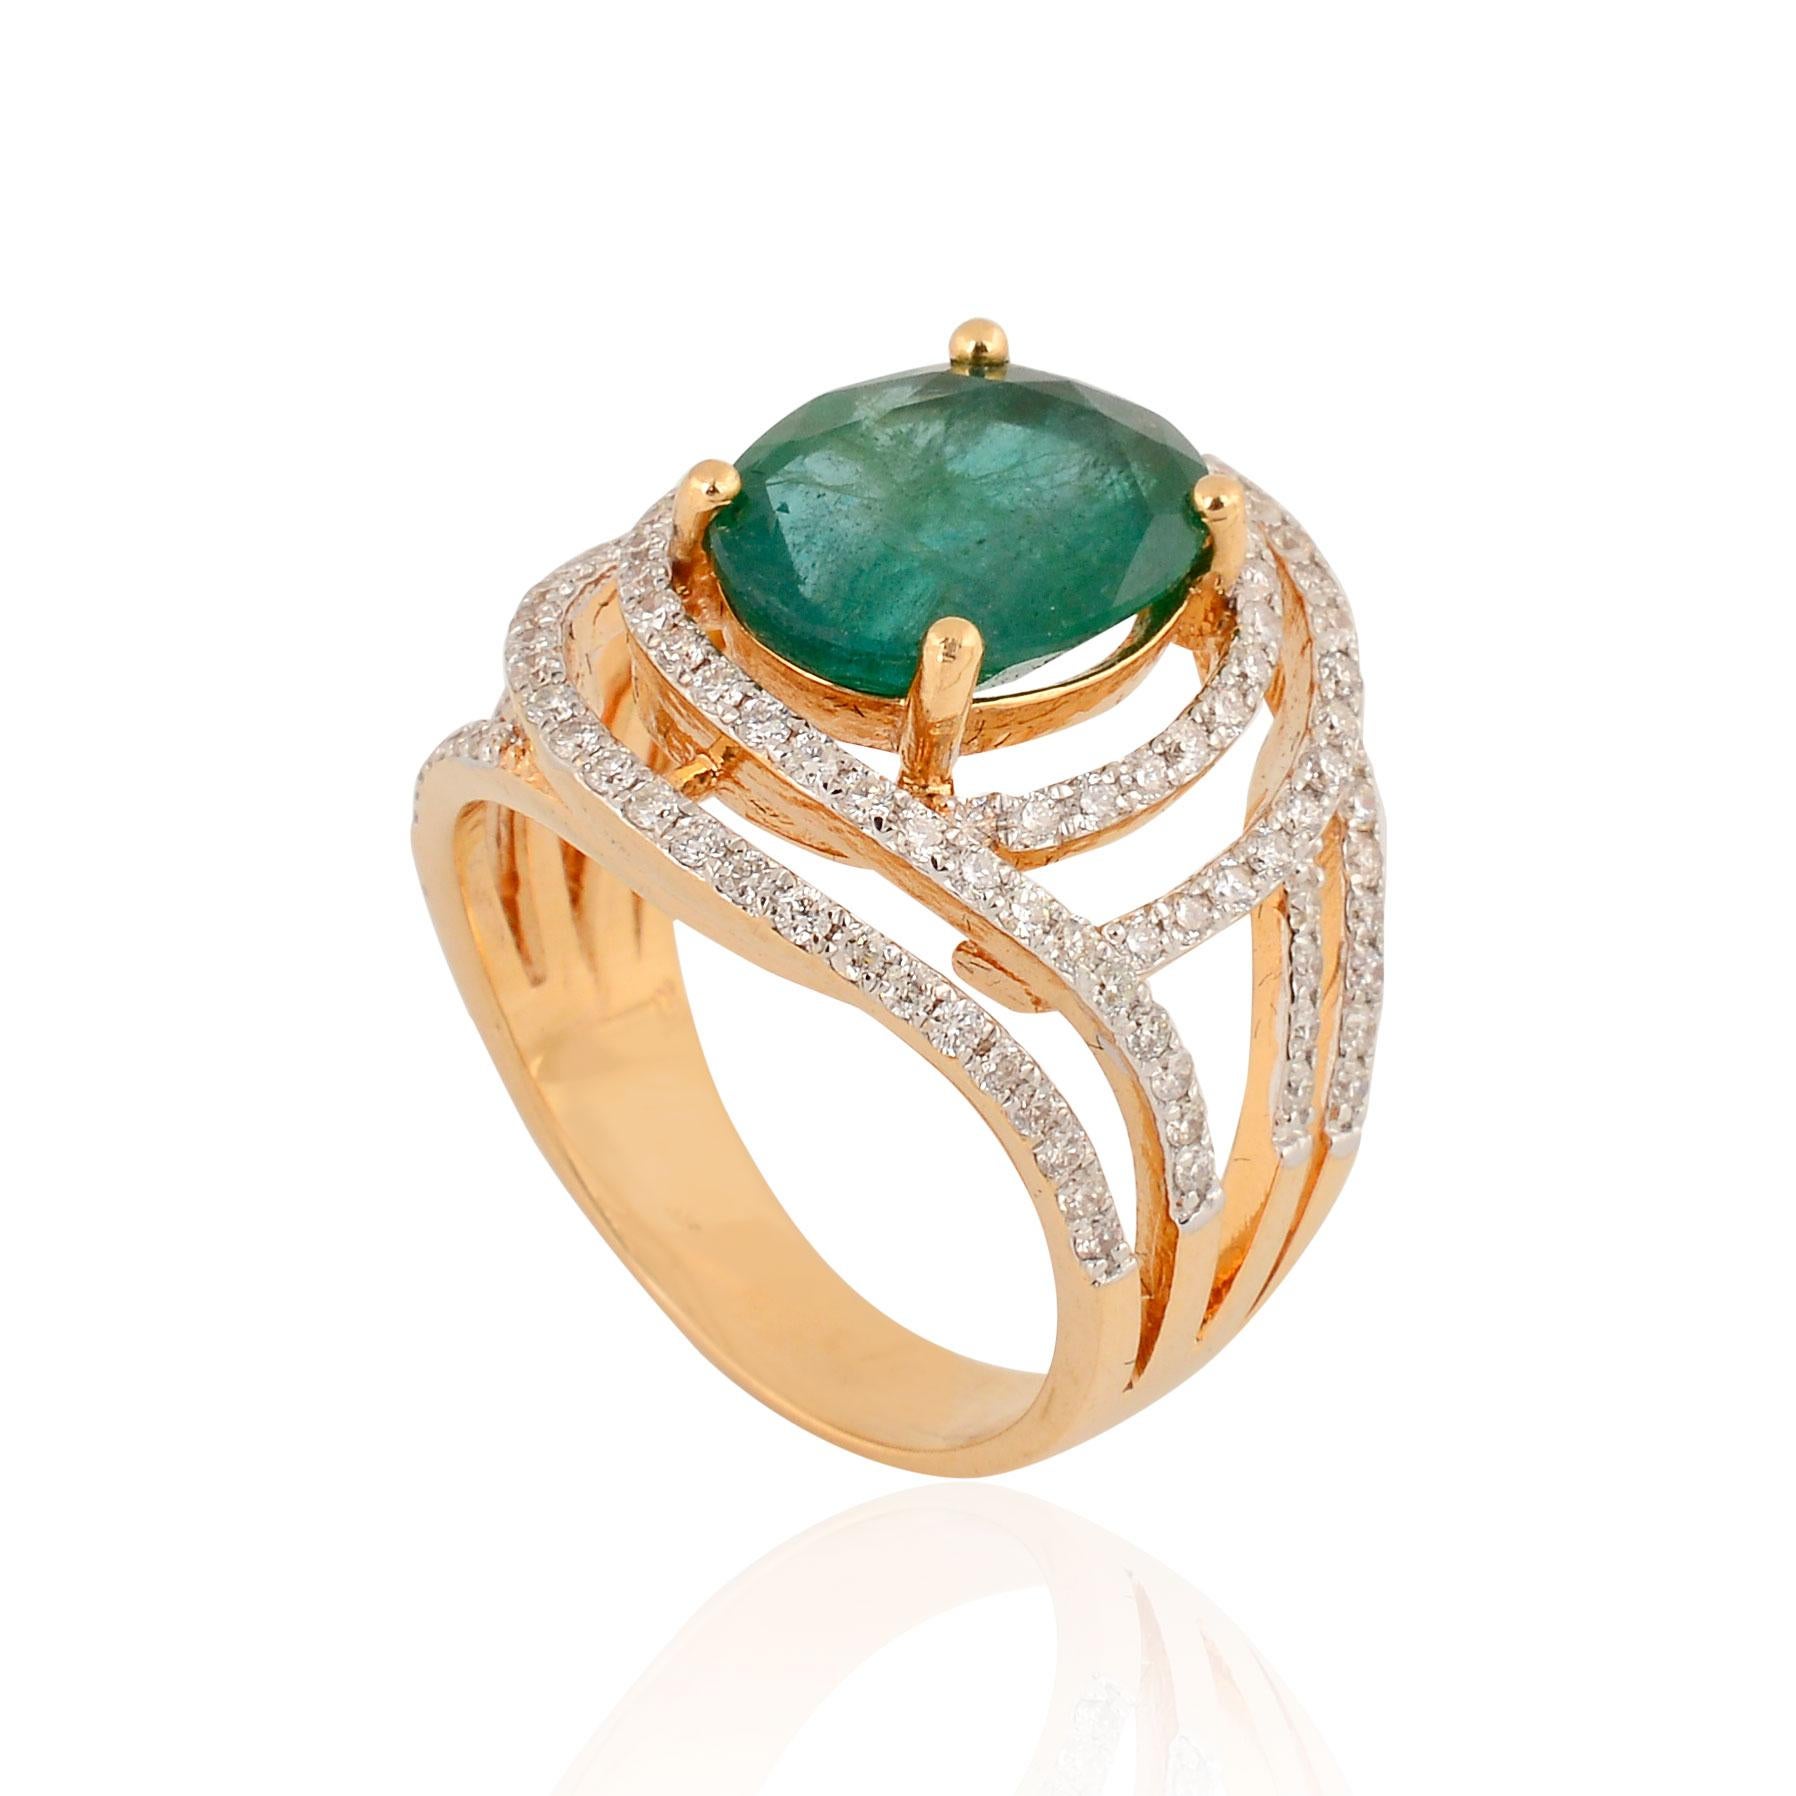 Modern Oval Natural Emerald Gemstone Ring Diamond Pave 14k Yellow Gold Fine Jewelry For Sale